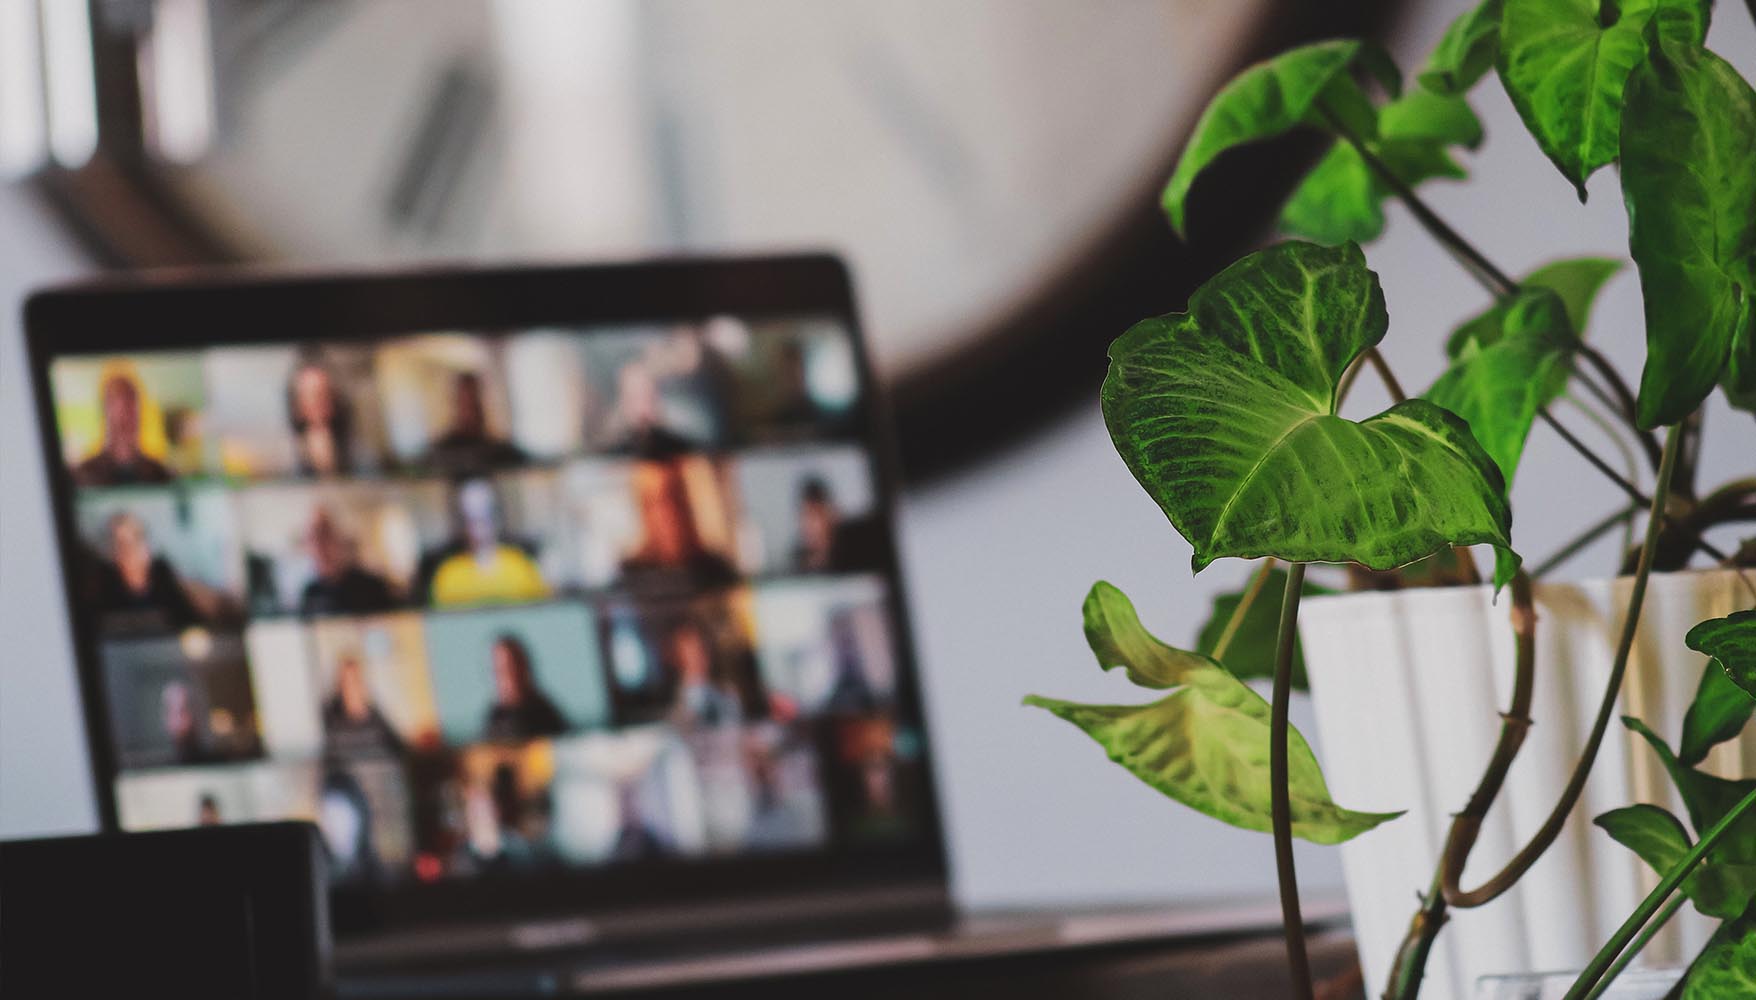 A photo of a plant in the foreground with a design workshop virutal event going on in a laptop in the background